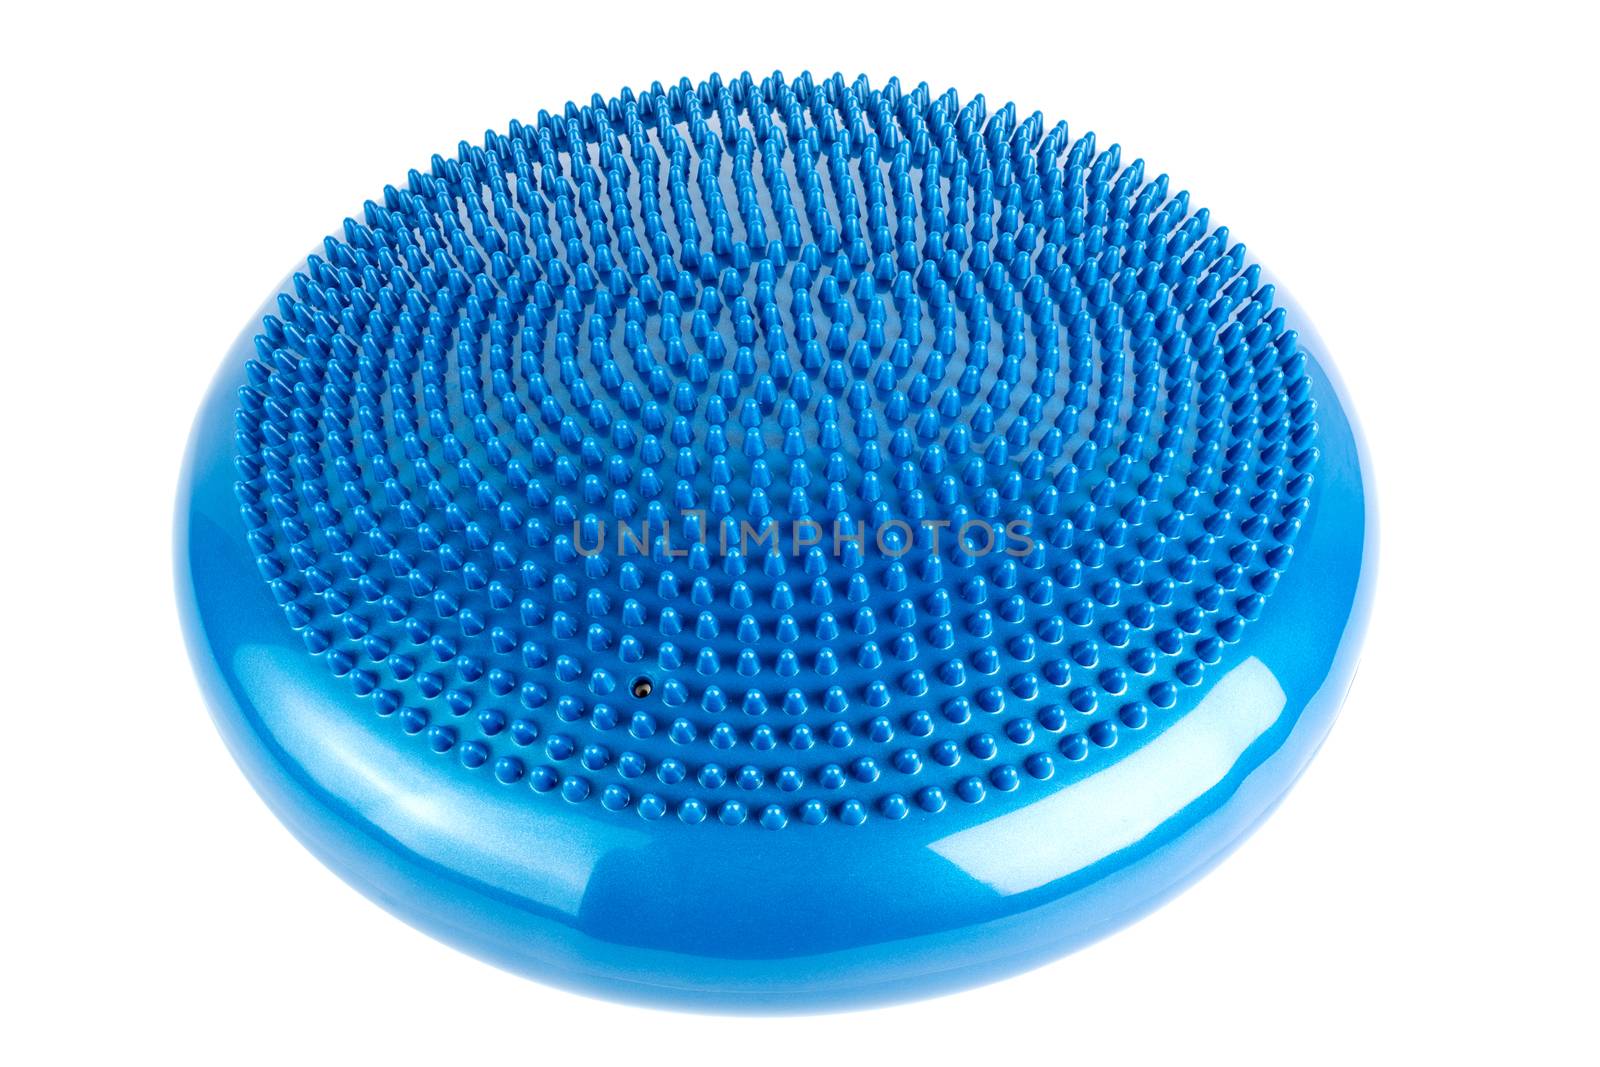 Blue inflatable balance disk isoleated on white background, It is also known as a stability disc, wobble disc, and balance cushion. by z1b